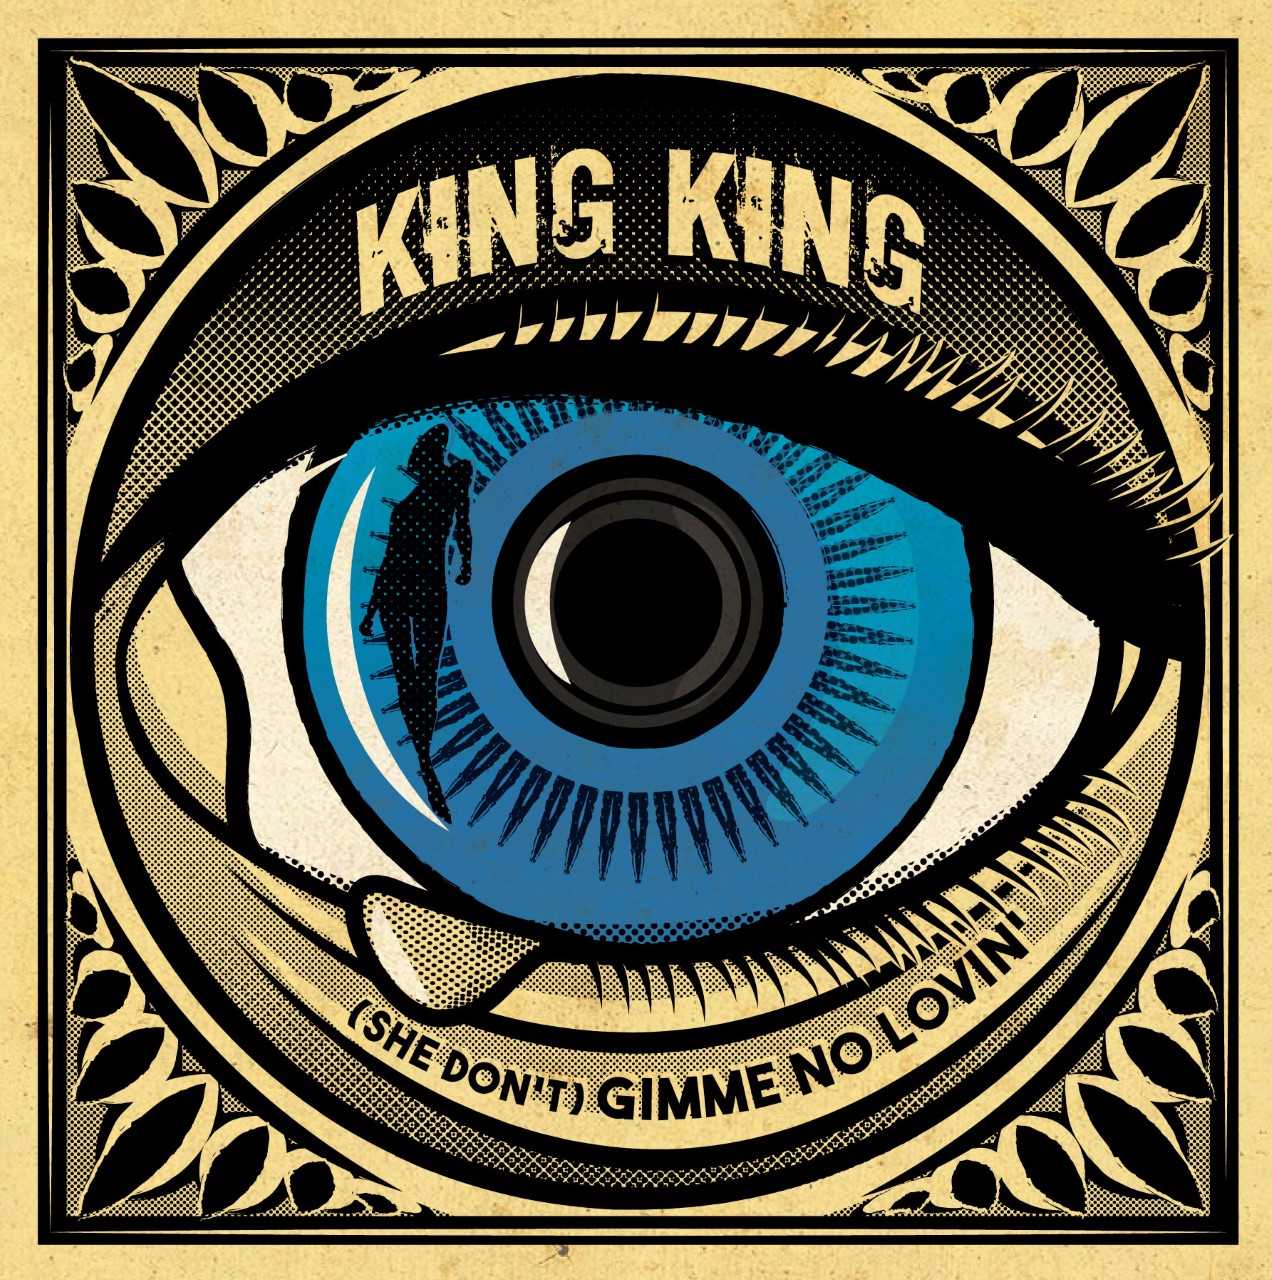 King King (She Don't) Gimme No Lovin' image for new single release